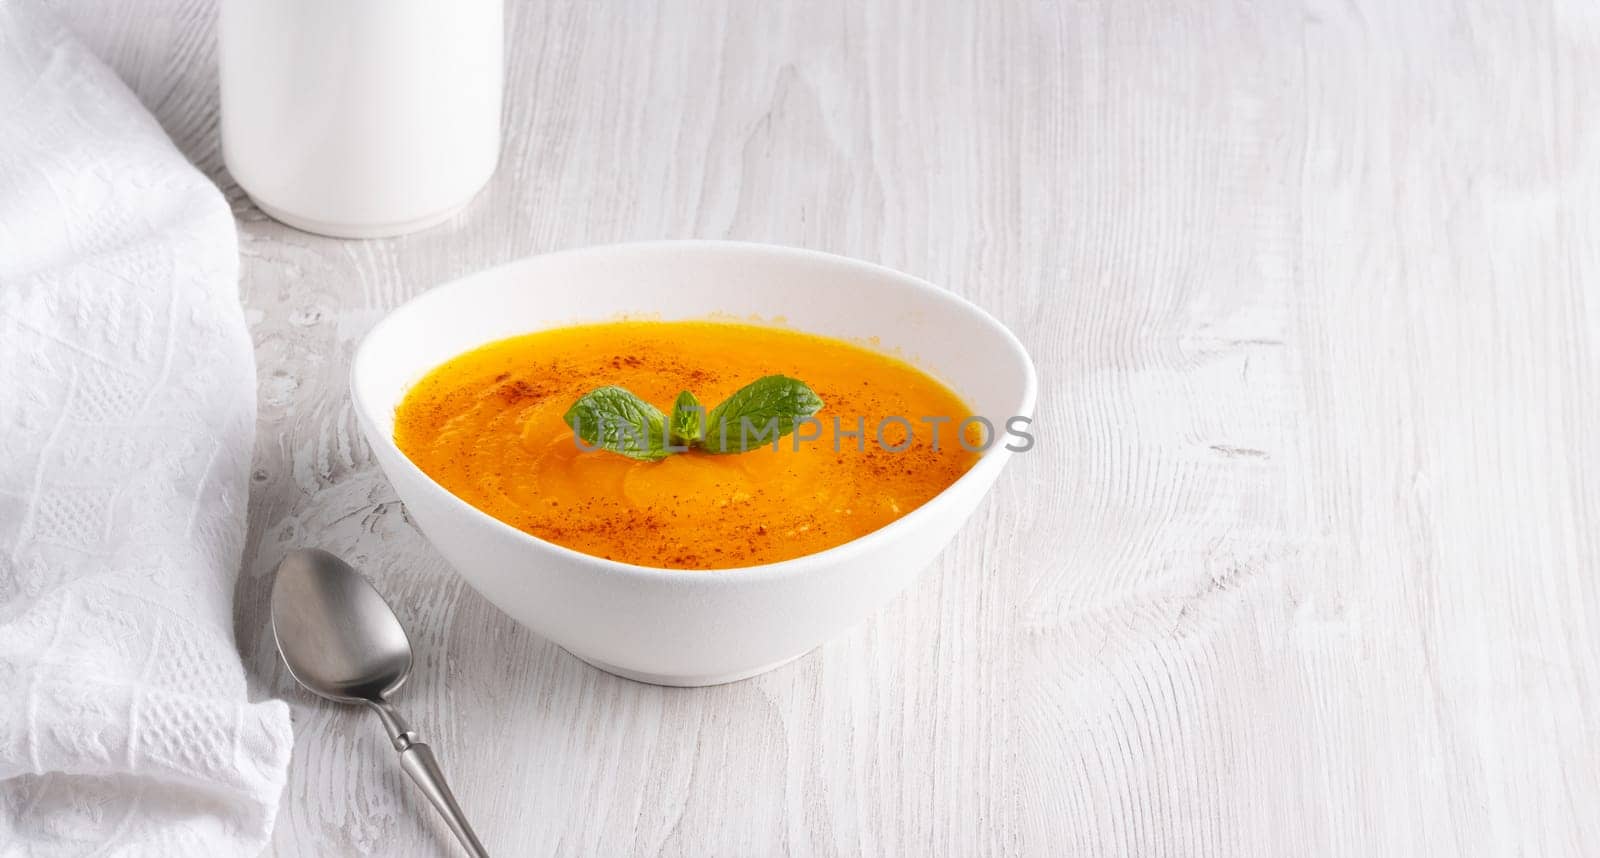 Pumpkin soup on a white wooden table, with copy space for text.